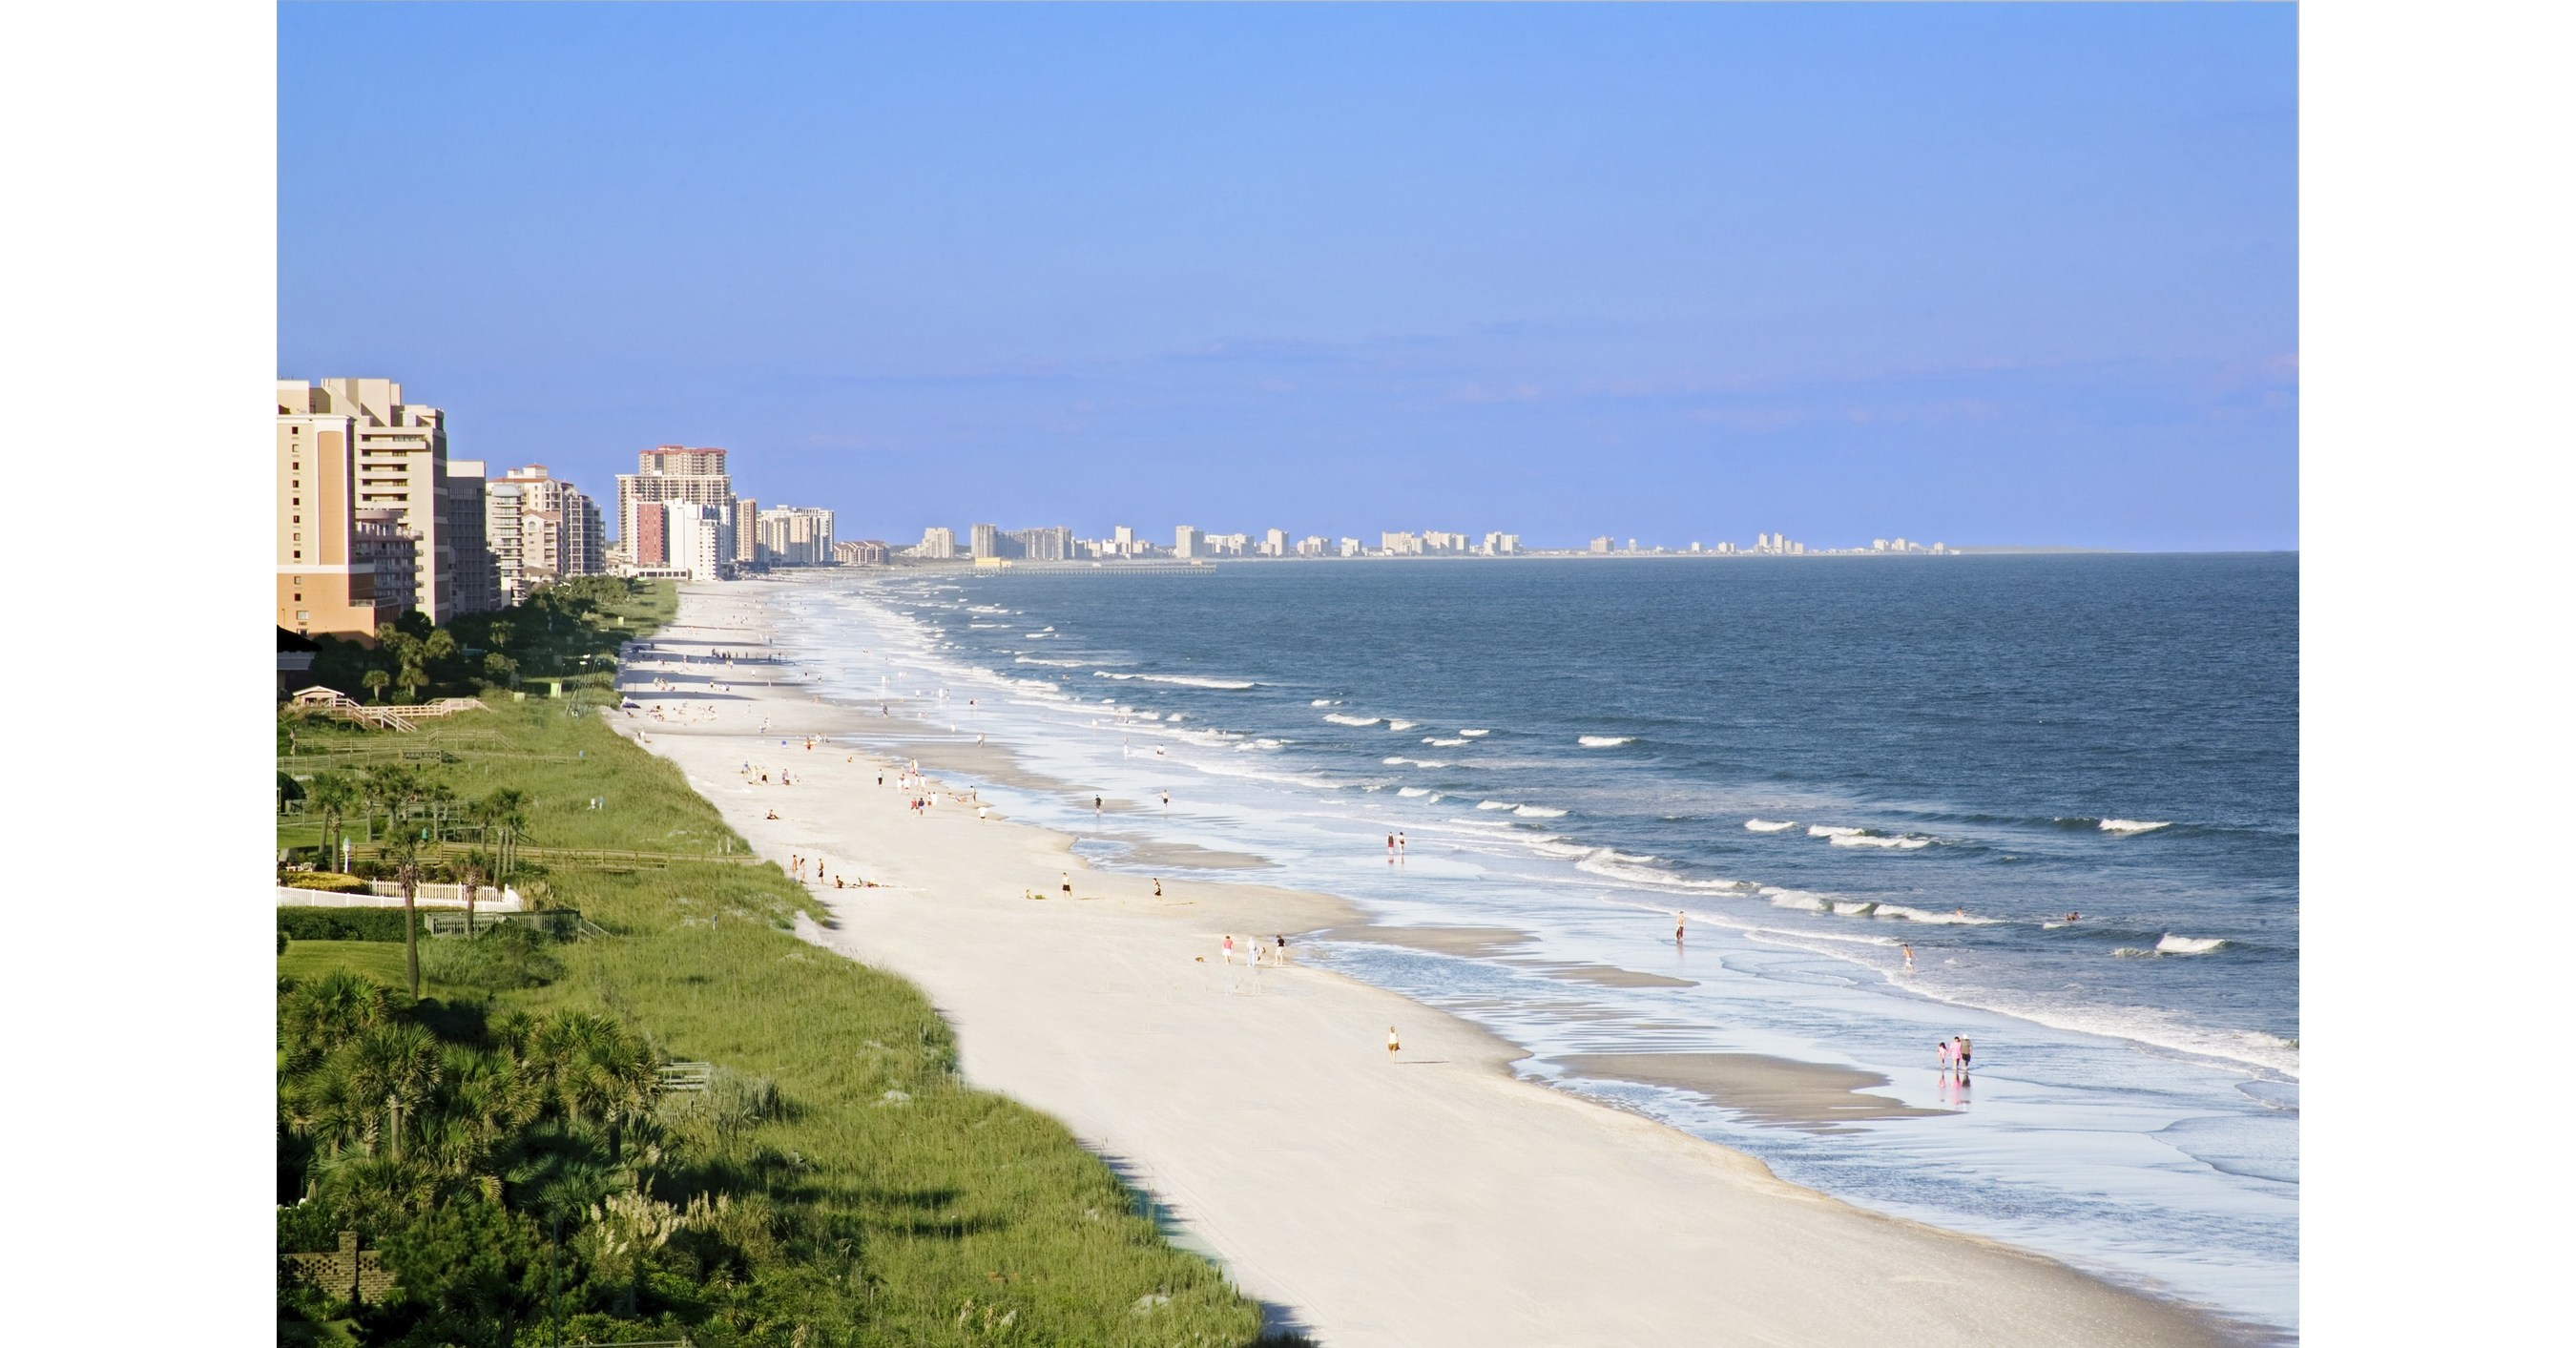 Spring is the perfect time for a getaway to Myrtle Beach, SC